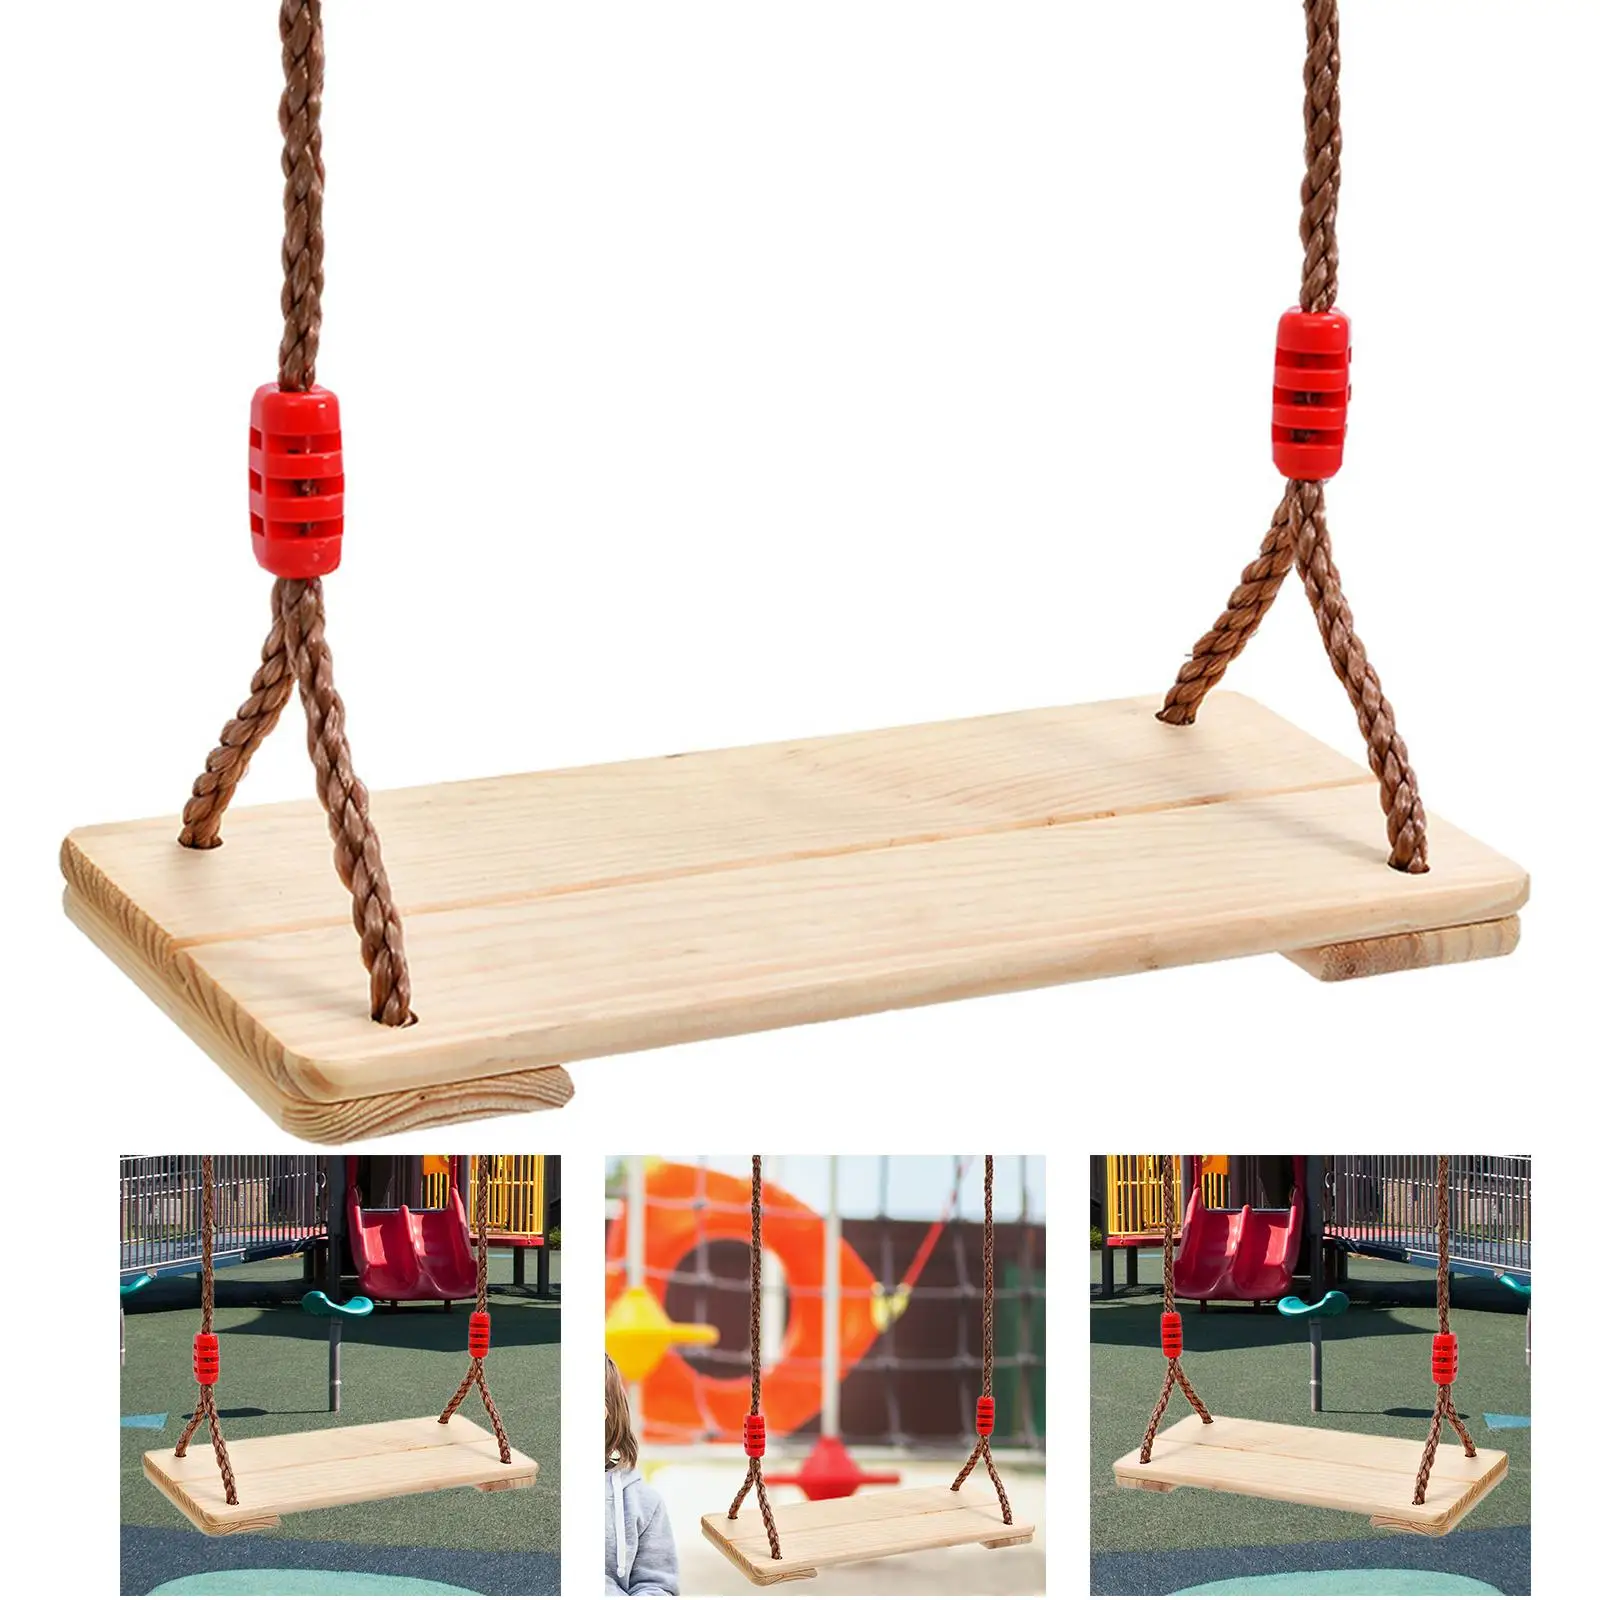 Kids Wooden Swing Garden Swing Seat Chair with Rope Toddler Toys Durable Hanging Swing for Park Garden Outdoor Backyard Tree